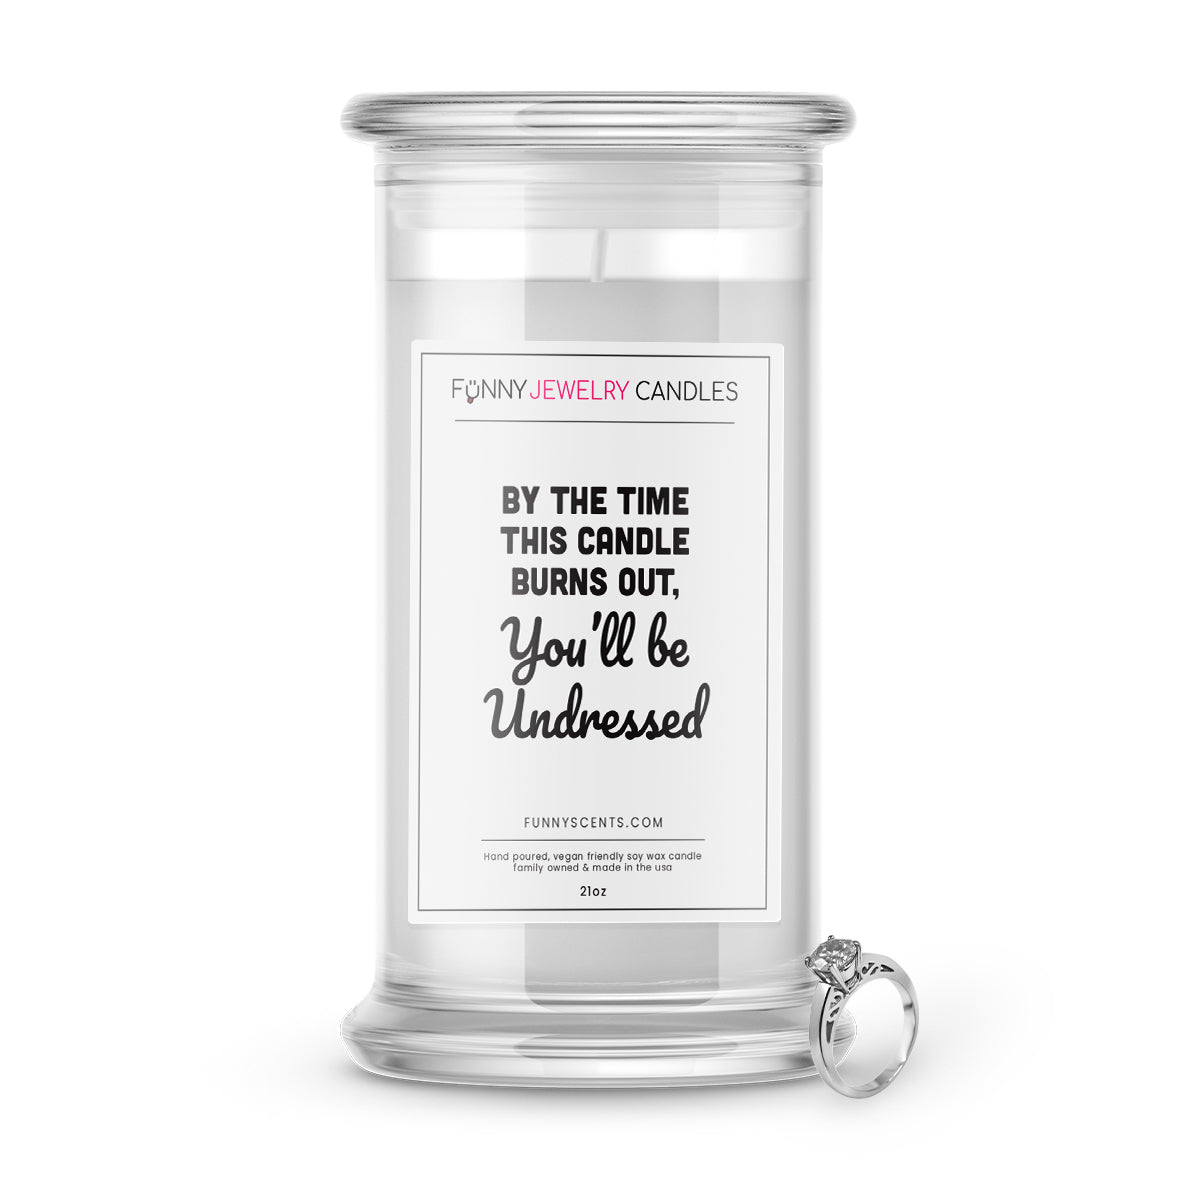 By The Time This Candle Burns Out, You'll be Undressed Jewelry Funny Candles